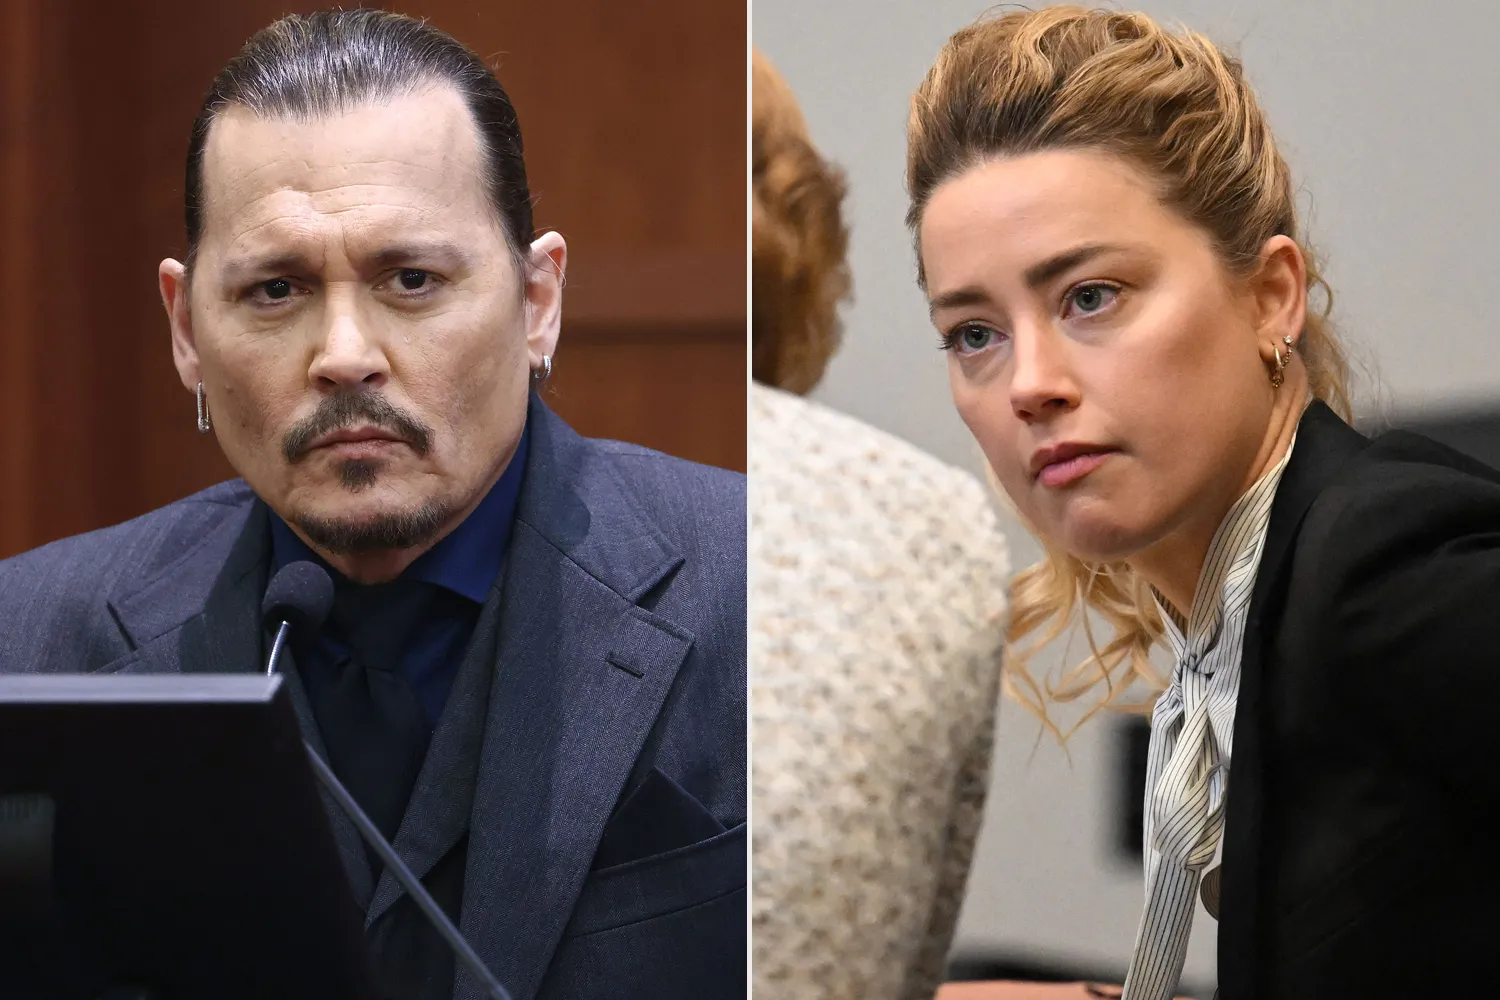 Amber Heard and Johnny Depp during the trial